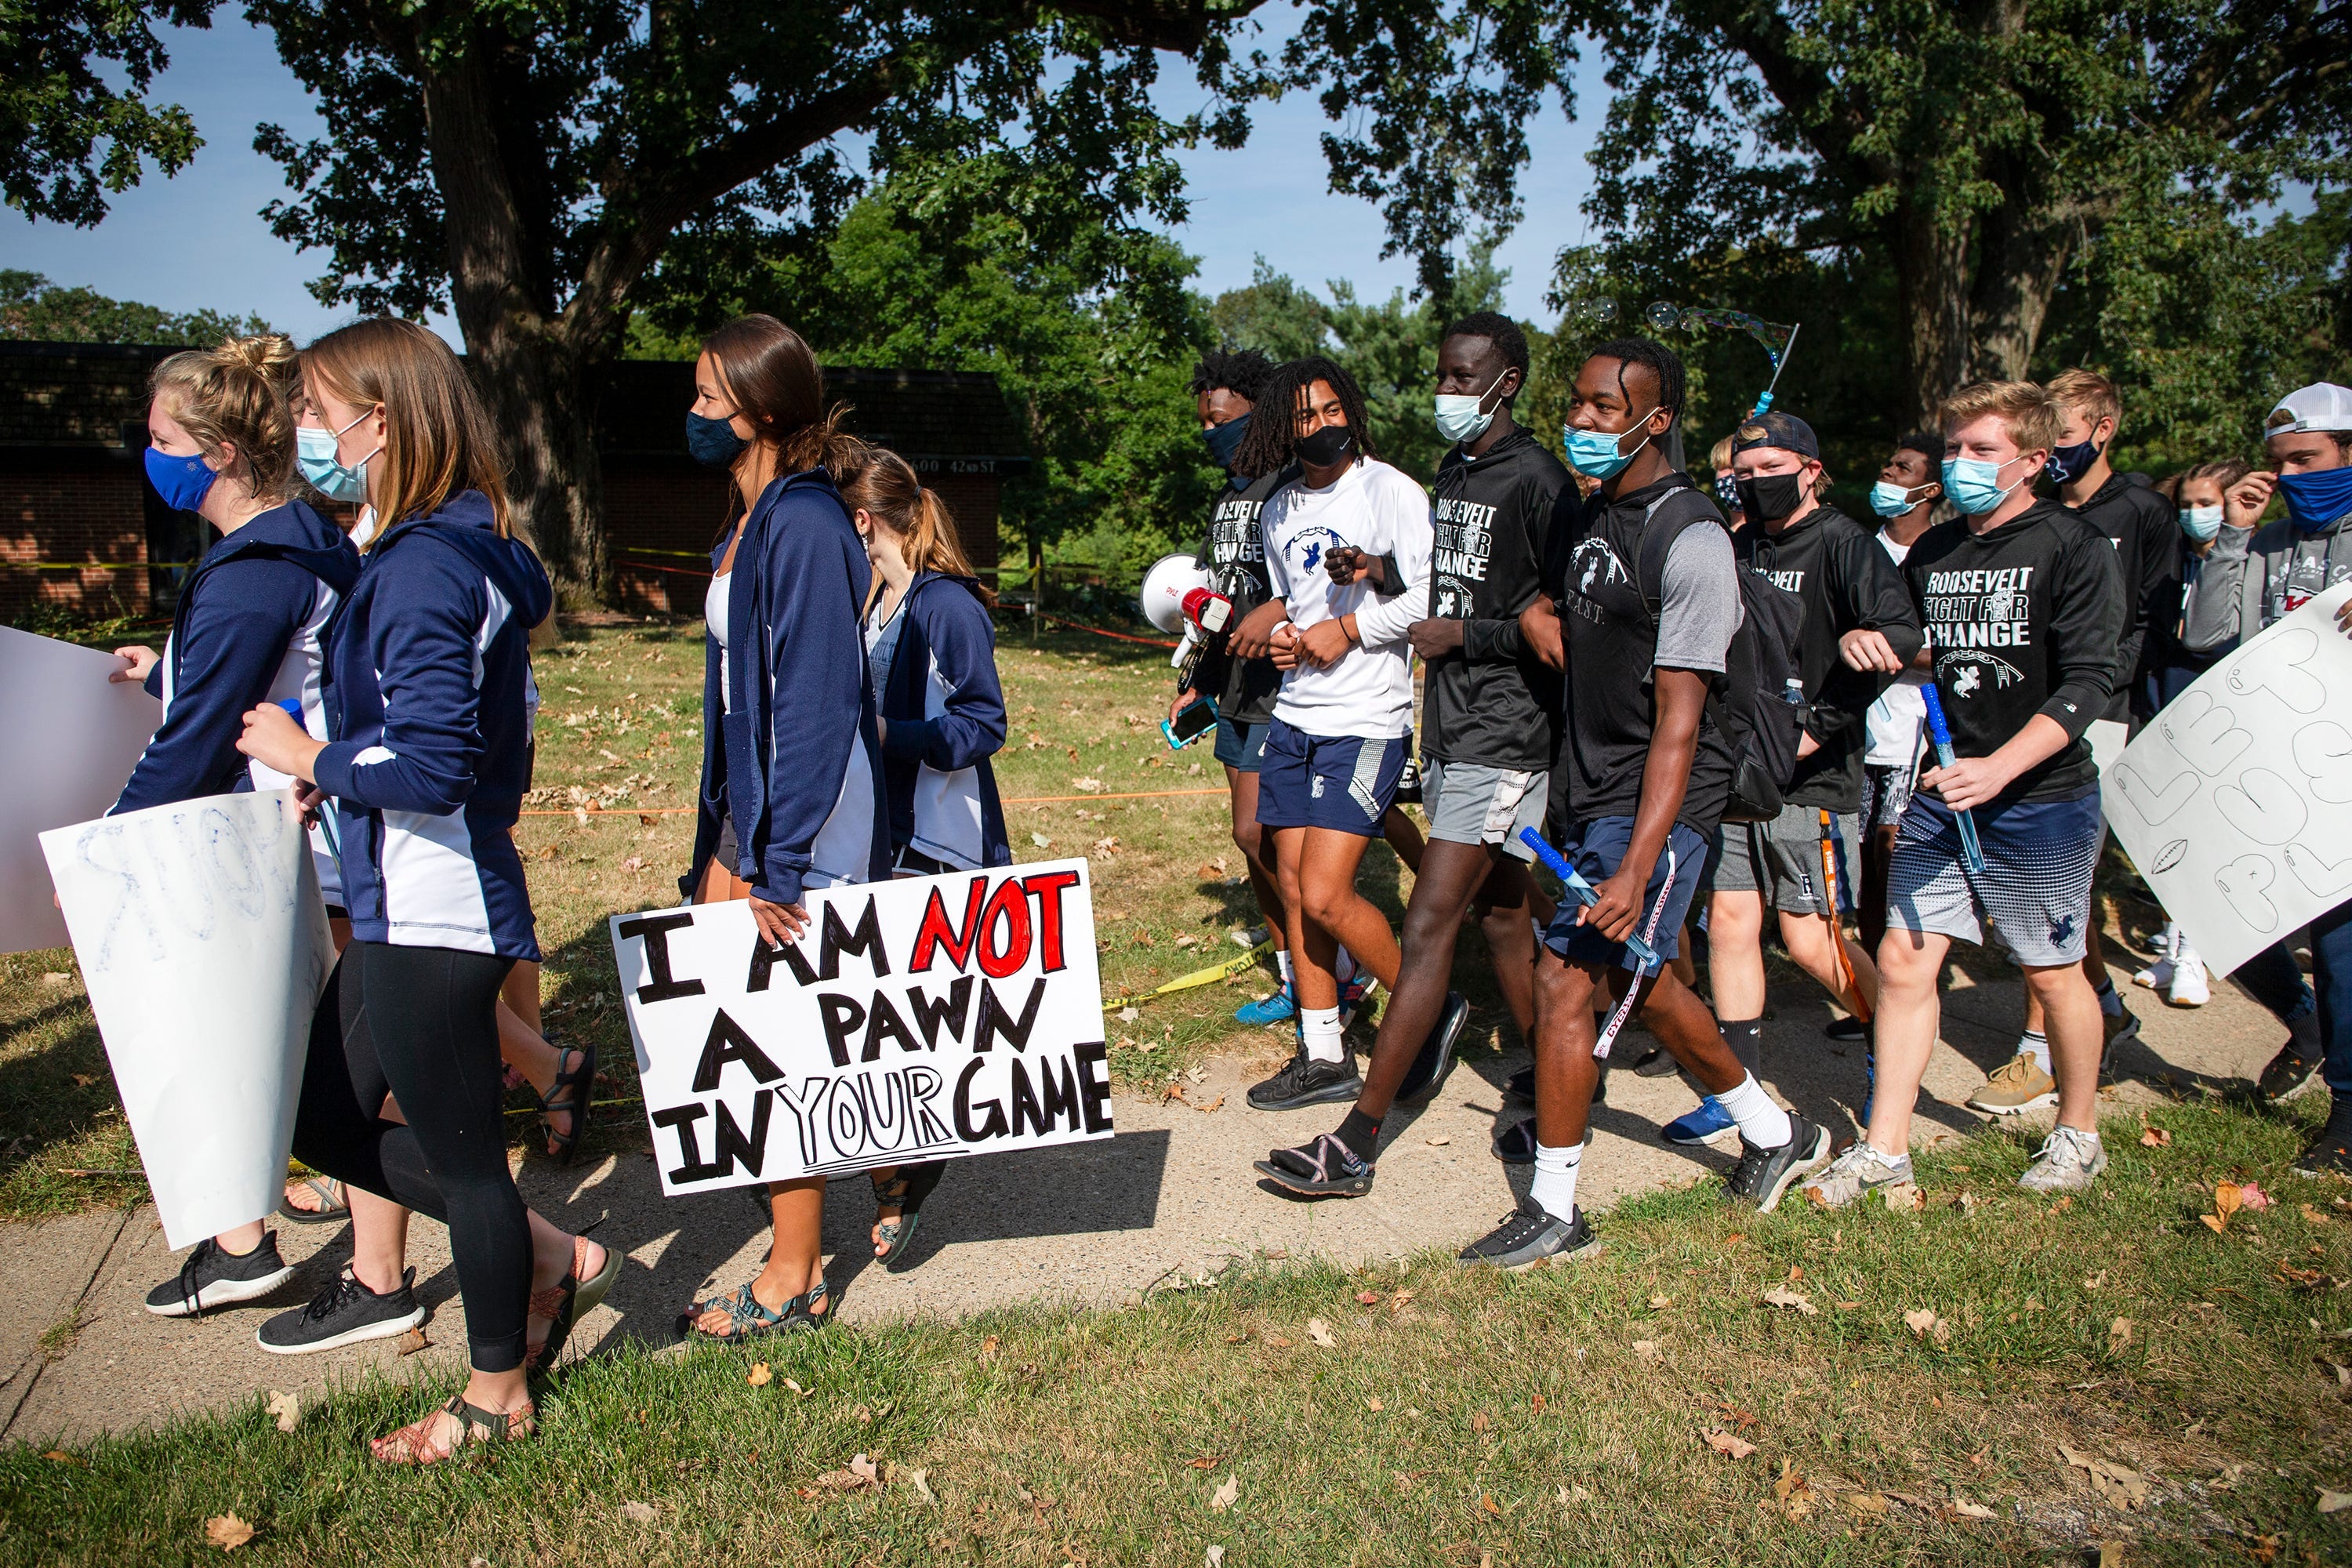 Public school students in Des Moines, Iowa, and supporters march to the governor's mansion Sept. 7 to protest the cancellation of fall and winter extracurricular programs.